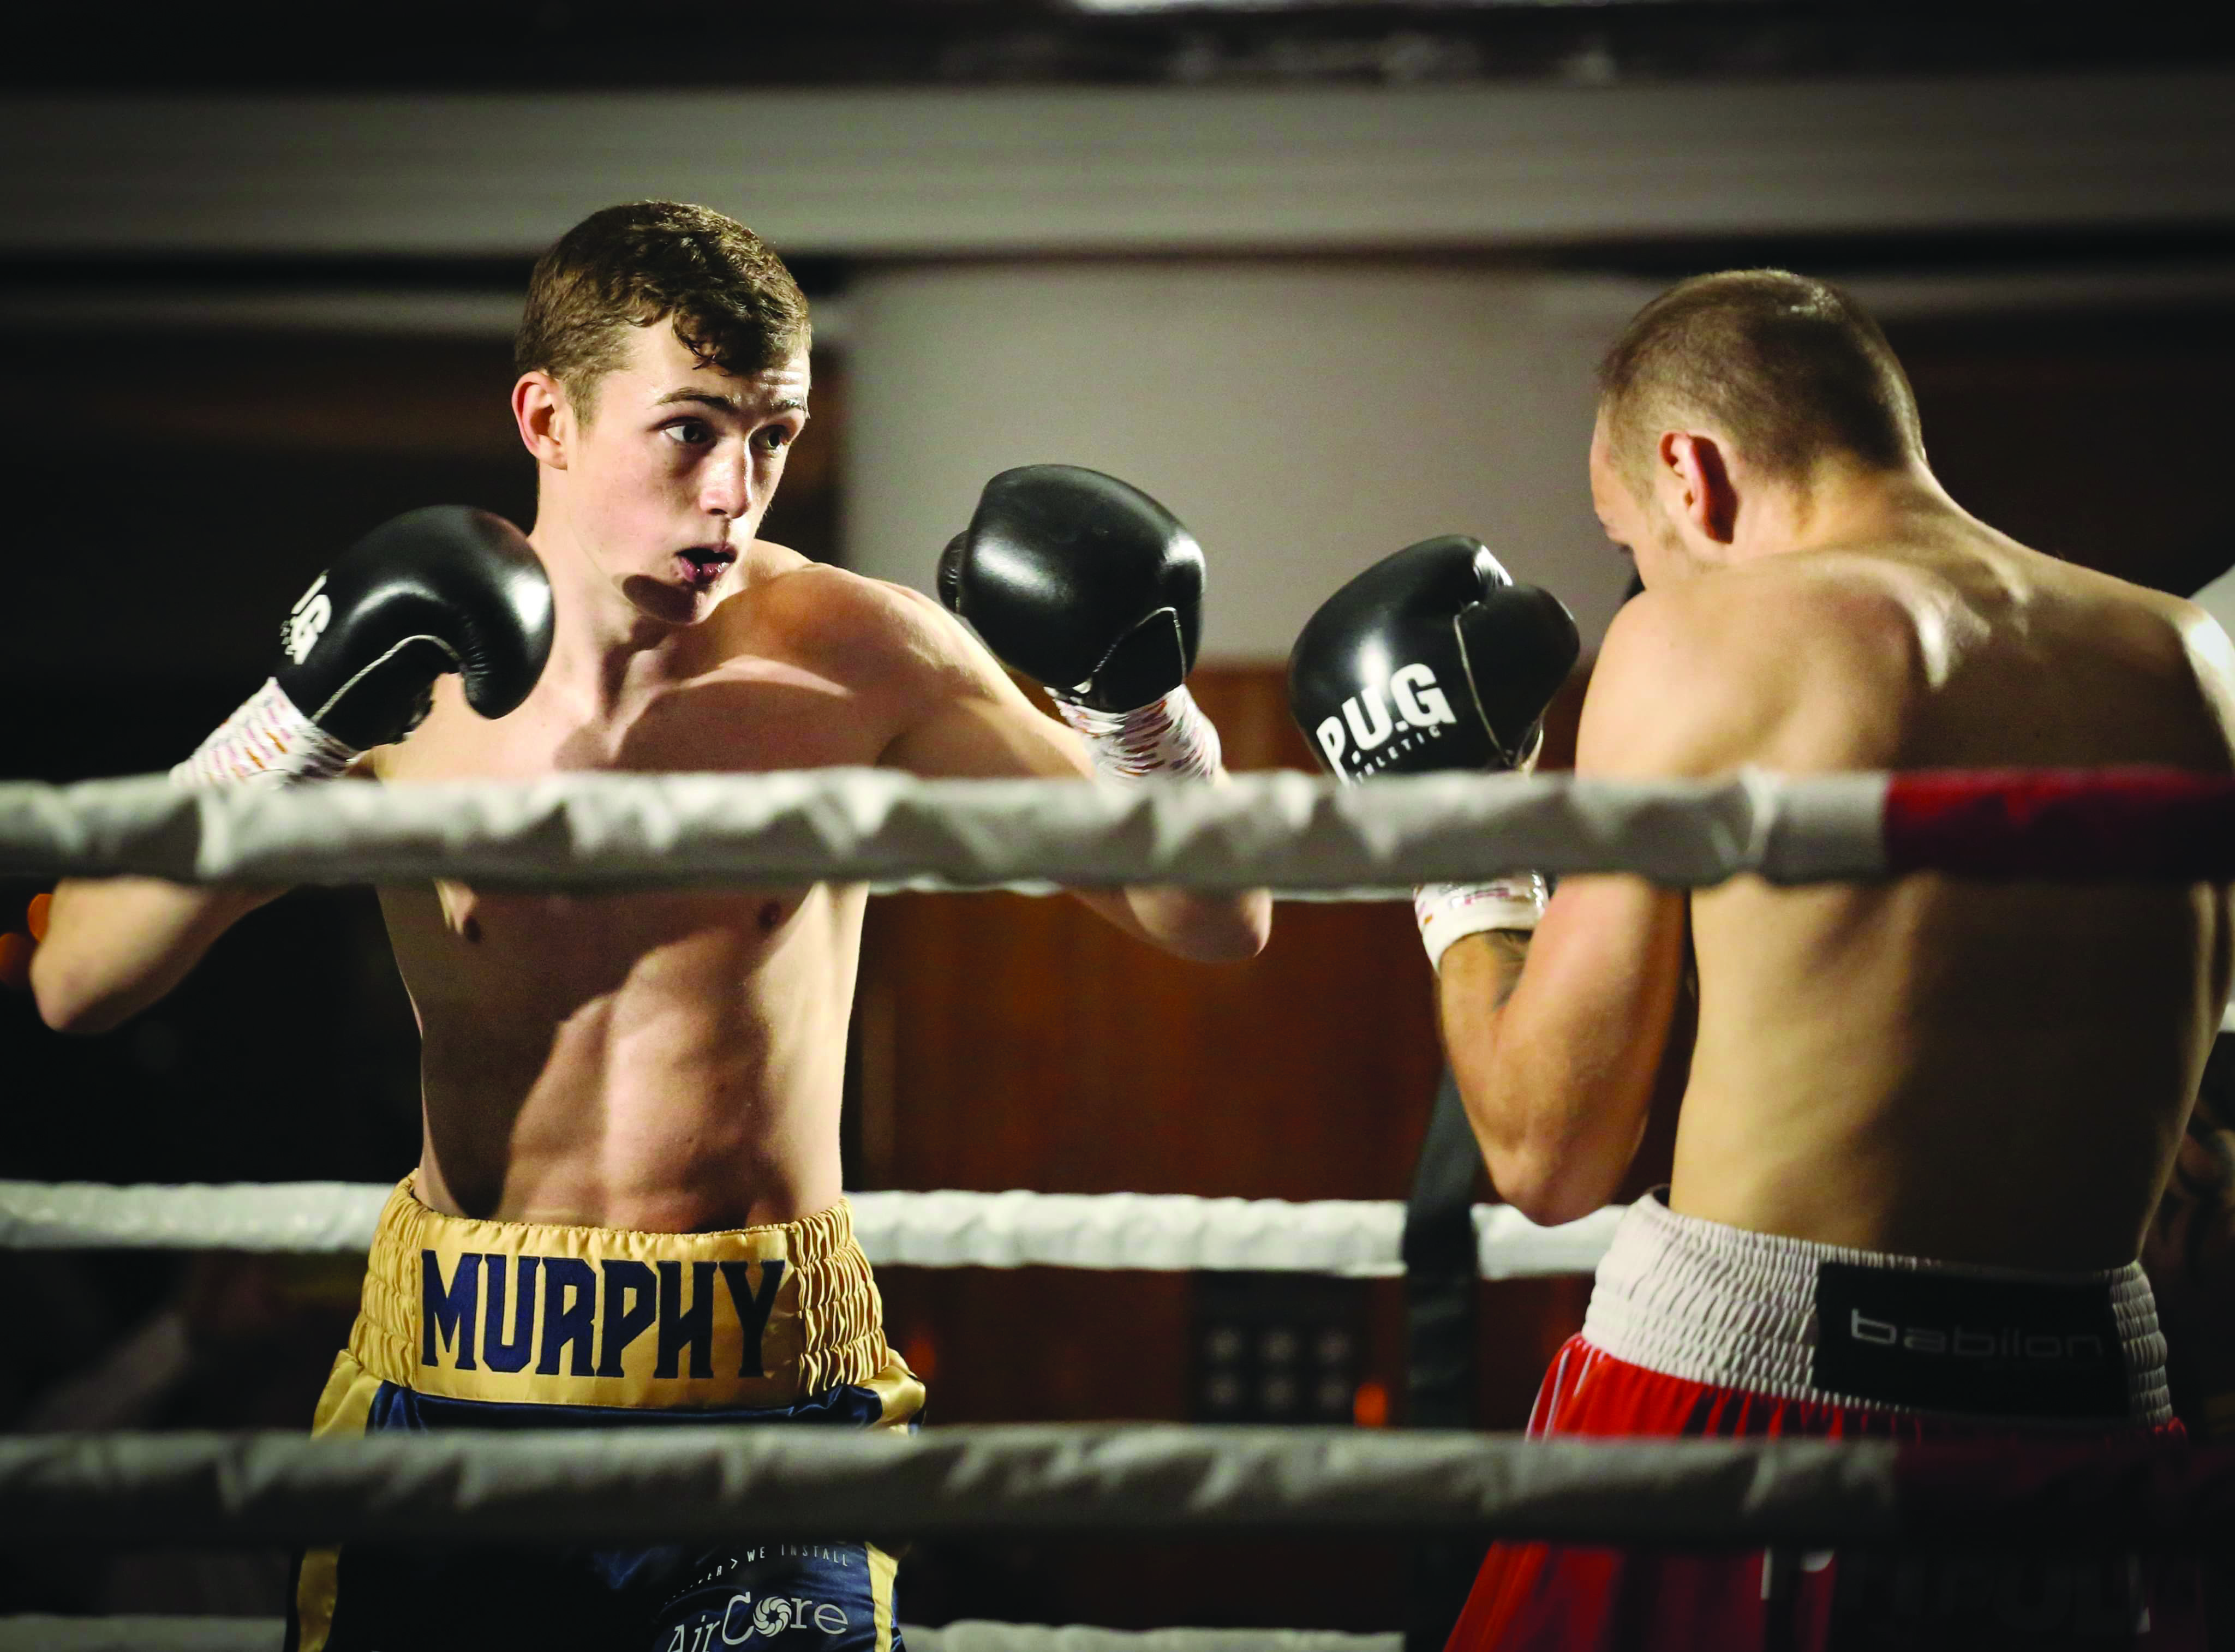 Colm Murphy faces the dangerous Brayan Mairena on the five-fight card on Saturday night that also includes North Belfast’s Ruadhan Farrell